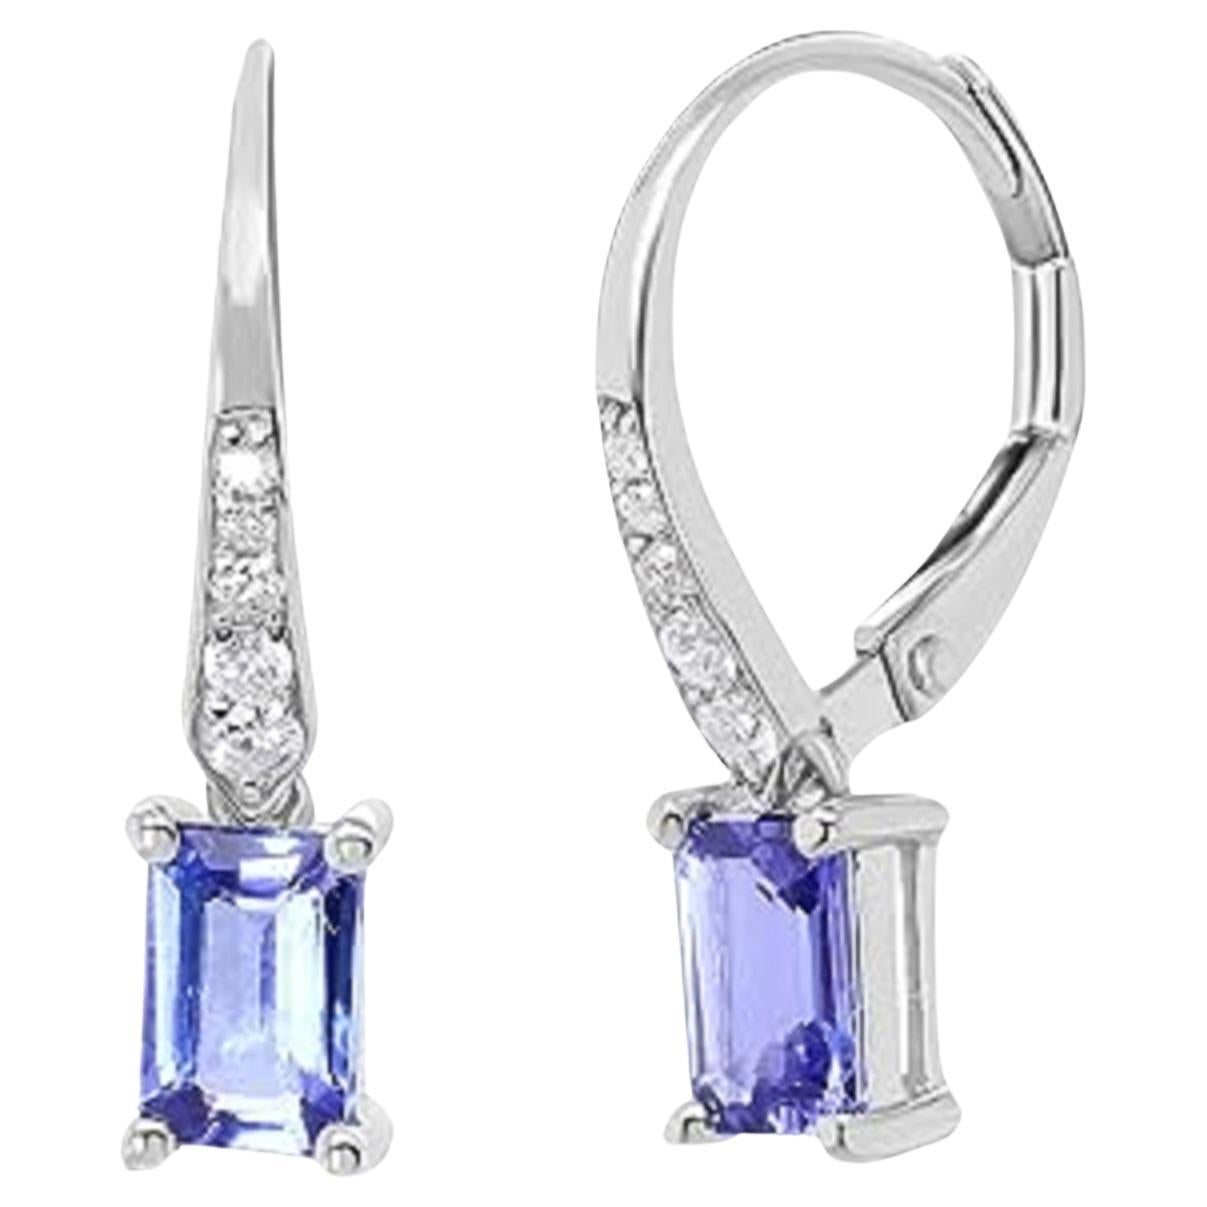 Gin & Grace 14K White Gold Genuine Tanzanite Earrings with Diamonds for Women For Sale